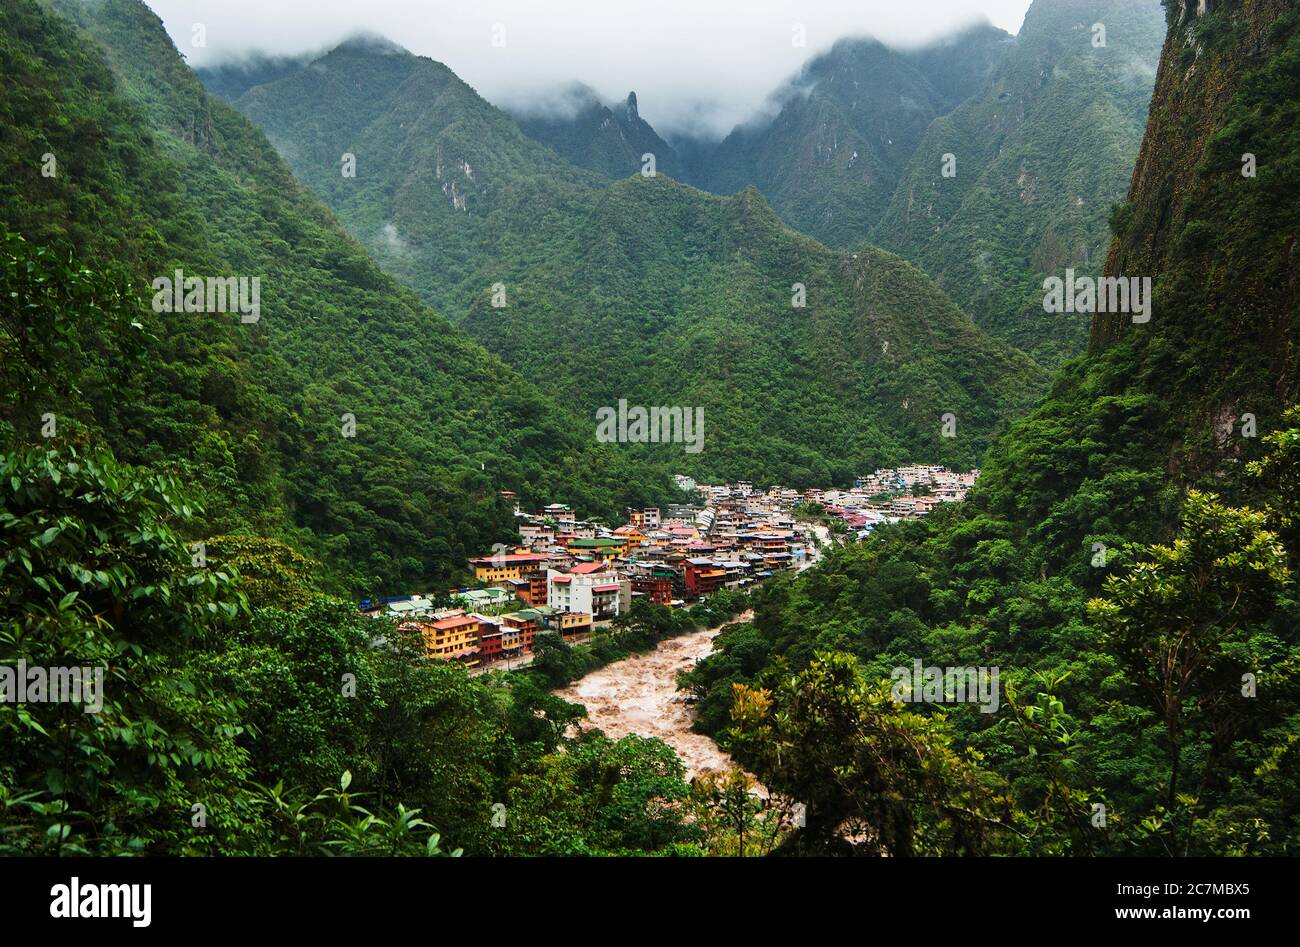 The Urubamba River flowing through the town of Aguas Calientes and the green Andes mountains, Cusco, Peru, South America Stock Photo